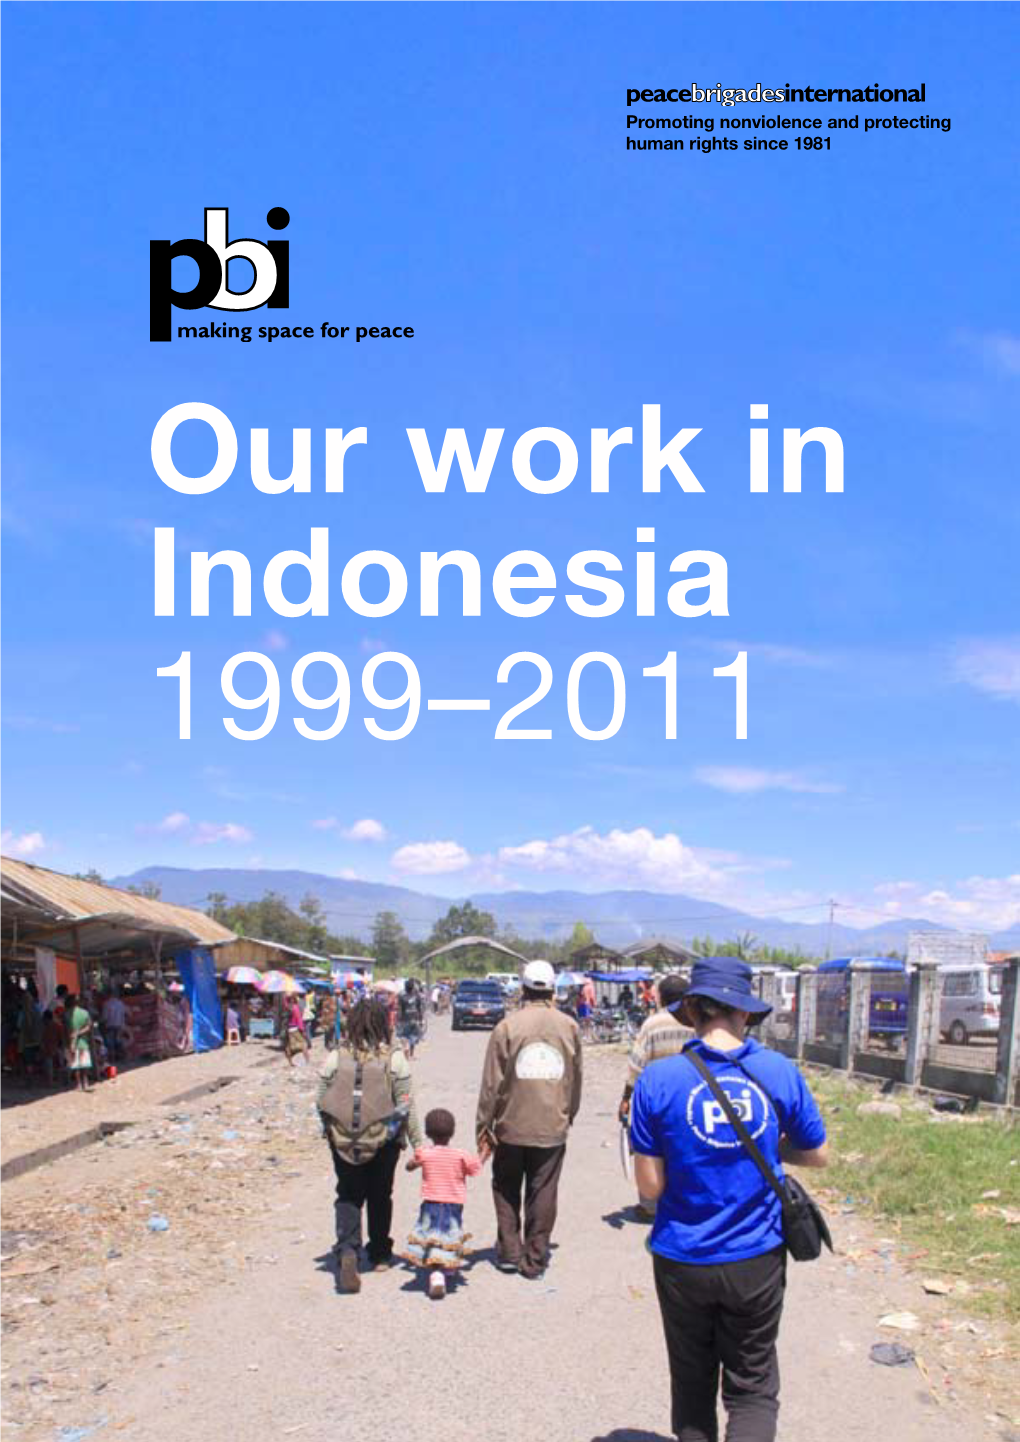 Our Work in Indonesia 1999-2011